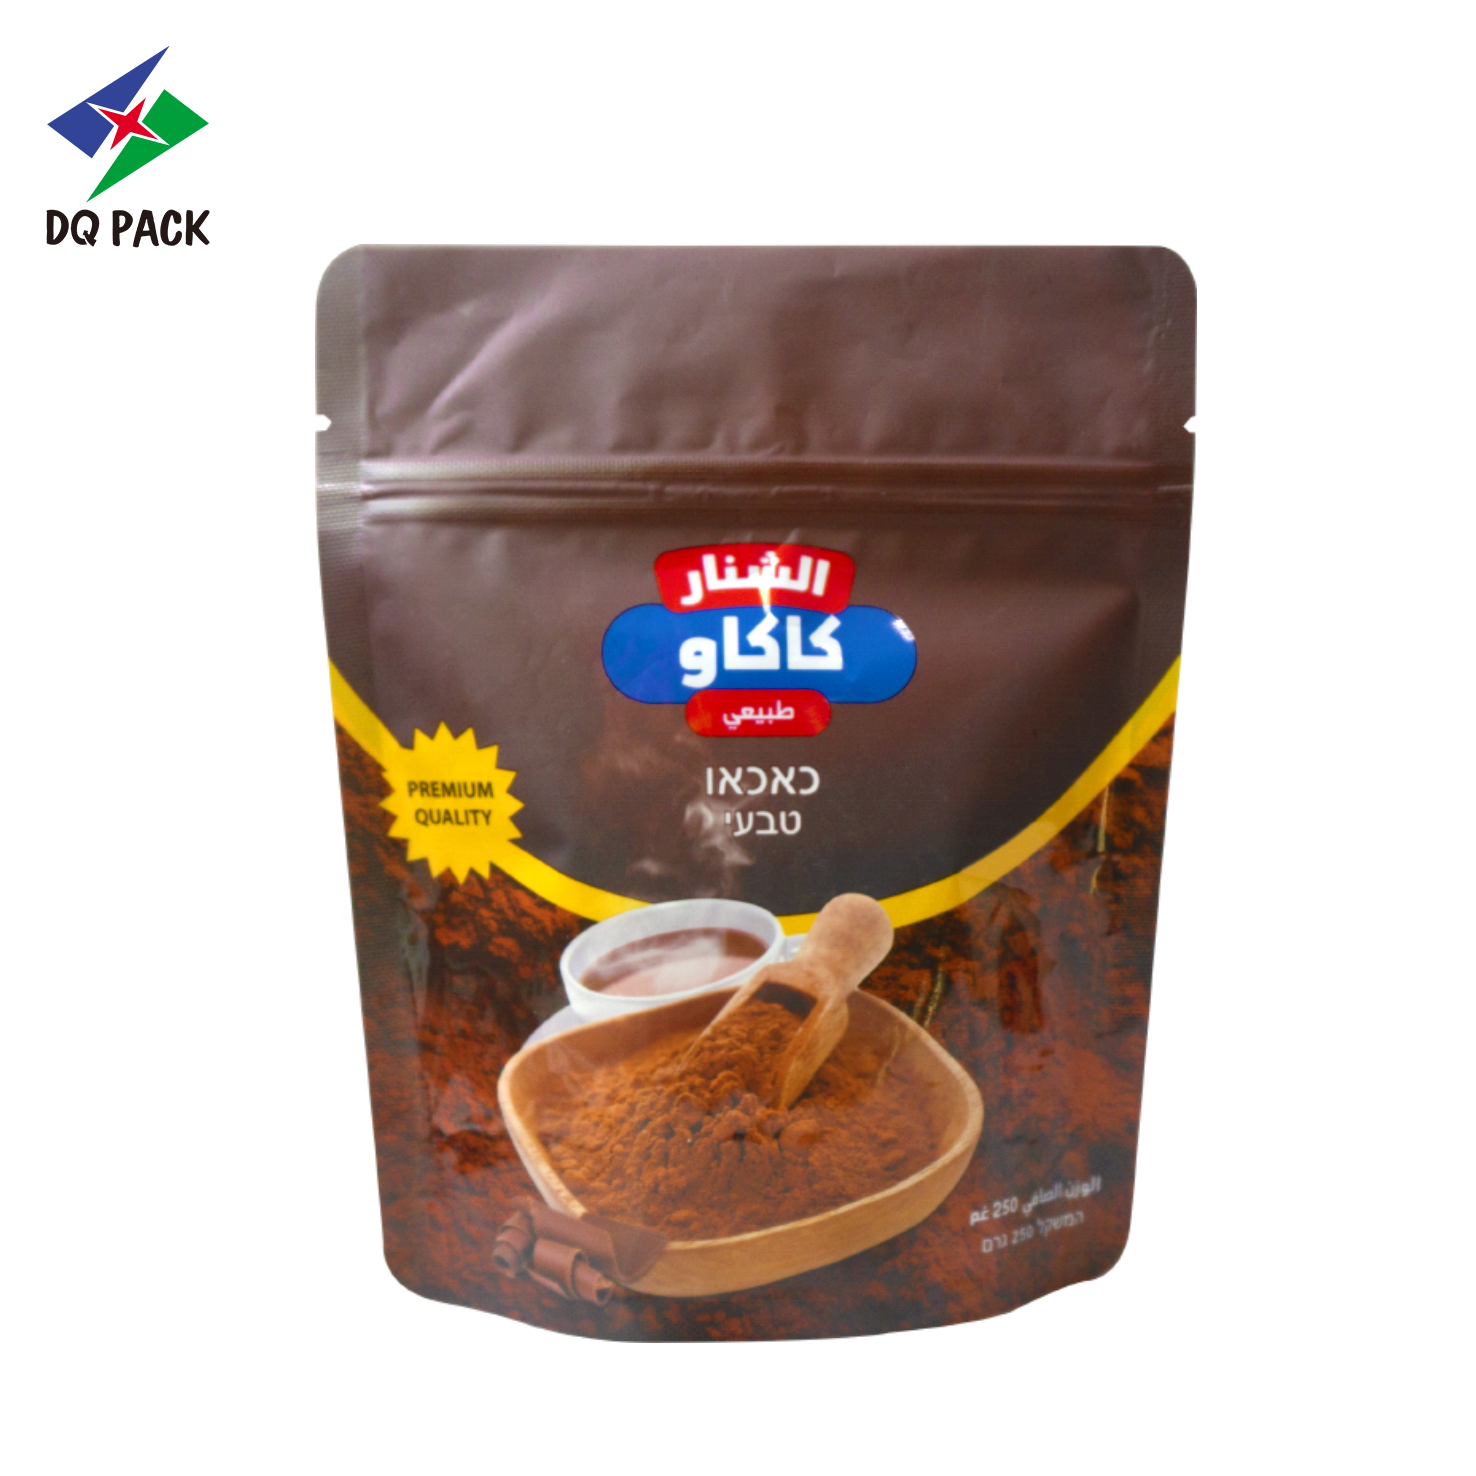 DQ PACK Matte Printing 250g Coffee Powder Stand Up Pouch With Zipper